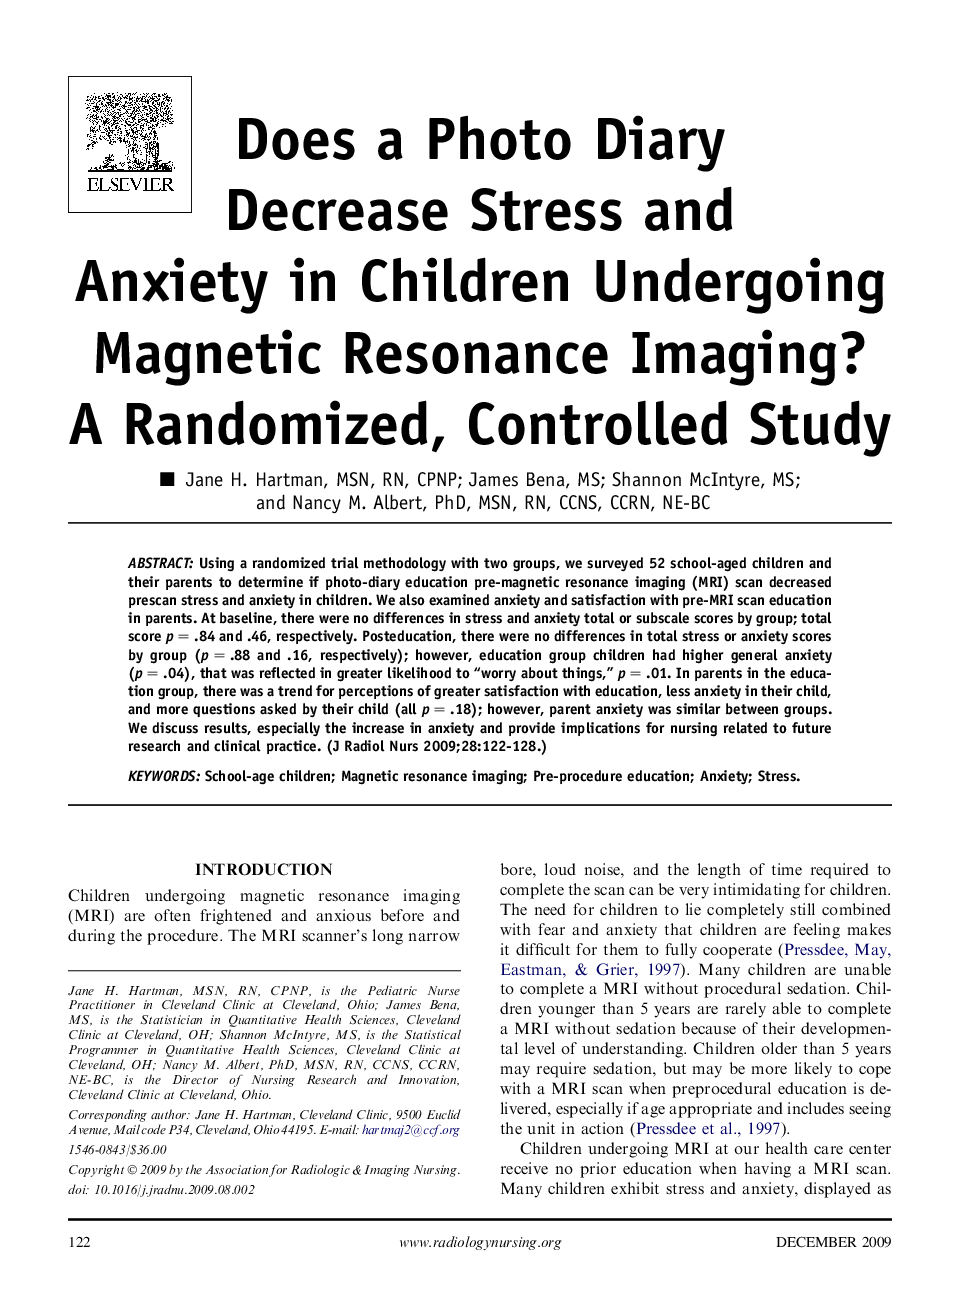 Does a Photo Diary Decrease Stress and Anxiety in Children Undergoing Magnetic Resonance Imaging? A Randomized, Controlled Study